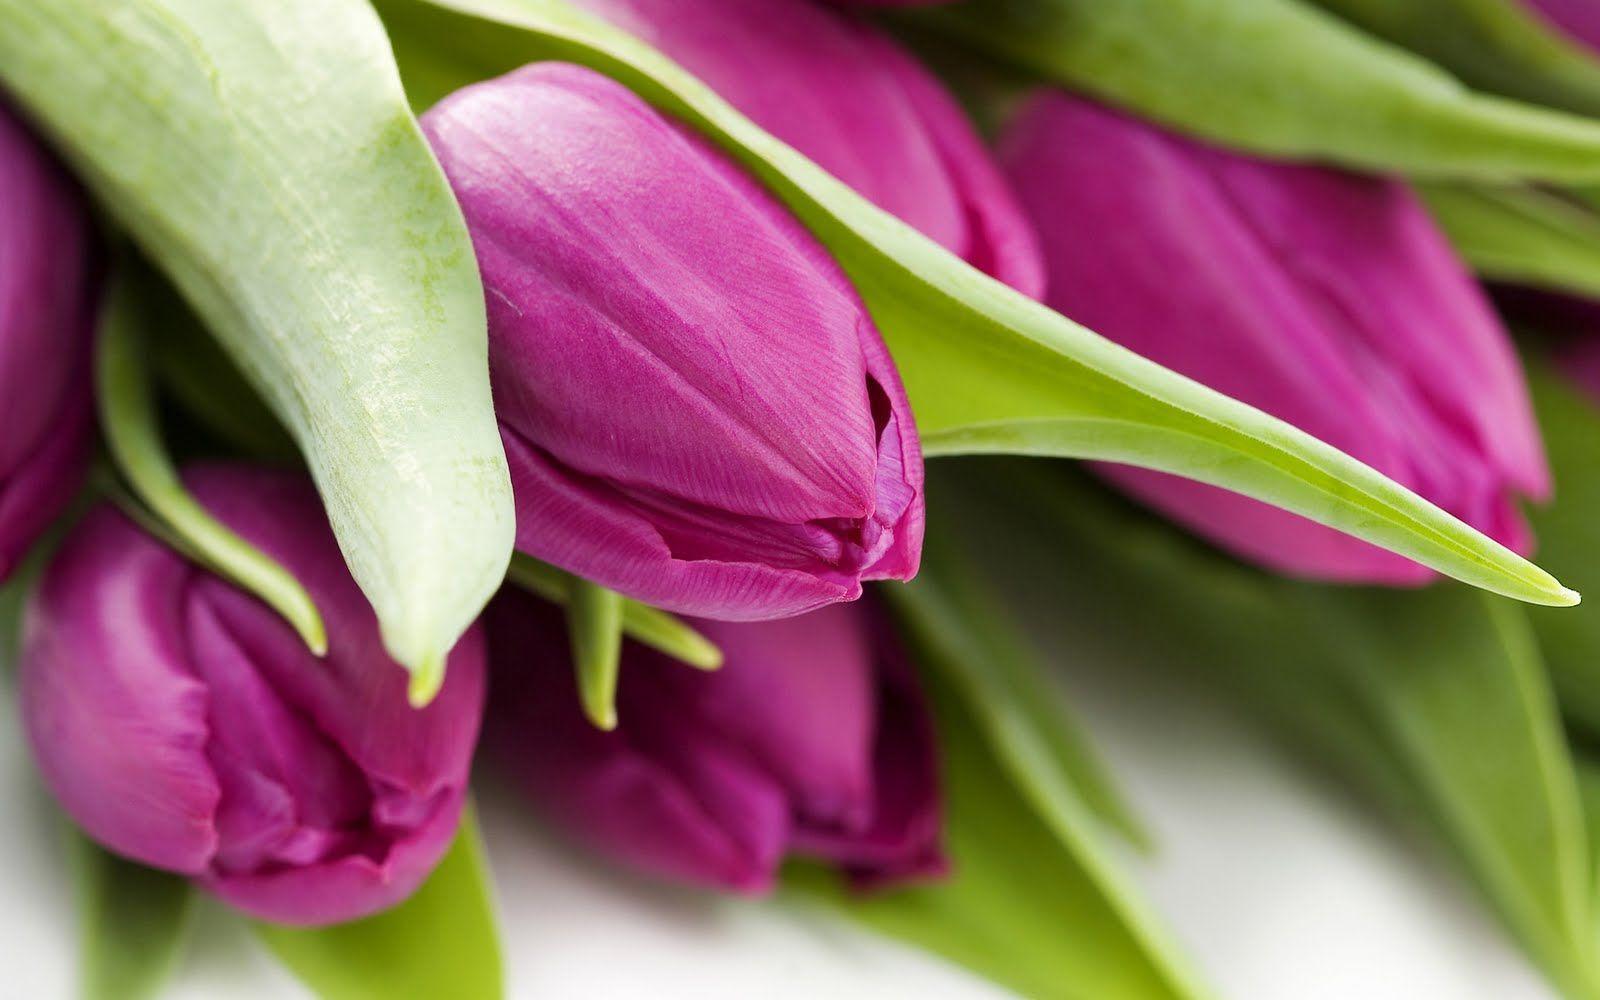 Wallpaper For > Purple And Pink Tulips Wallpaper